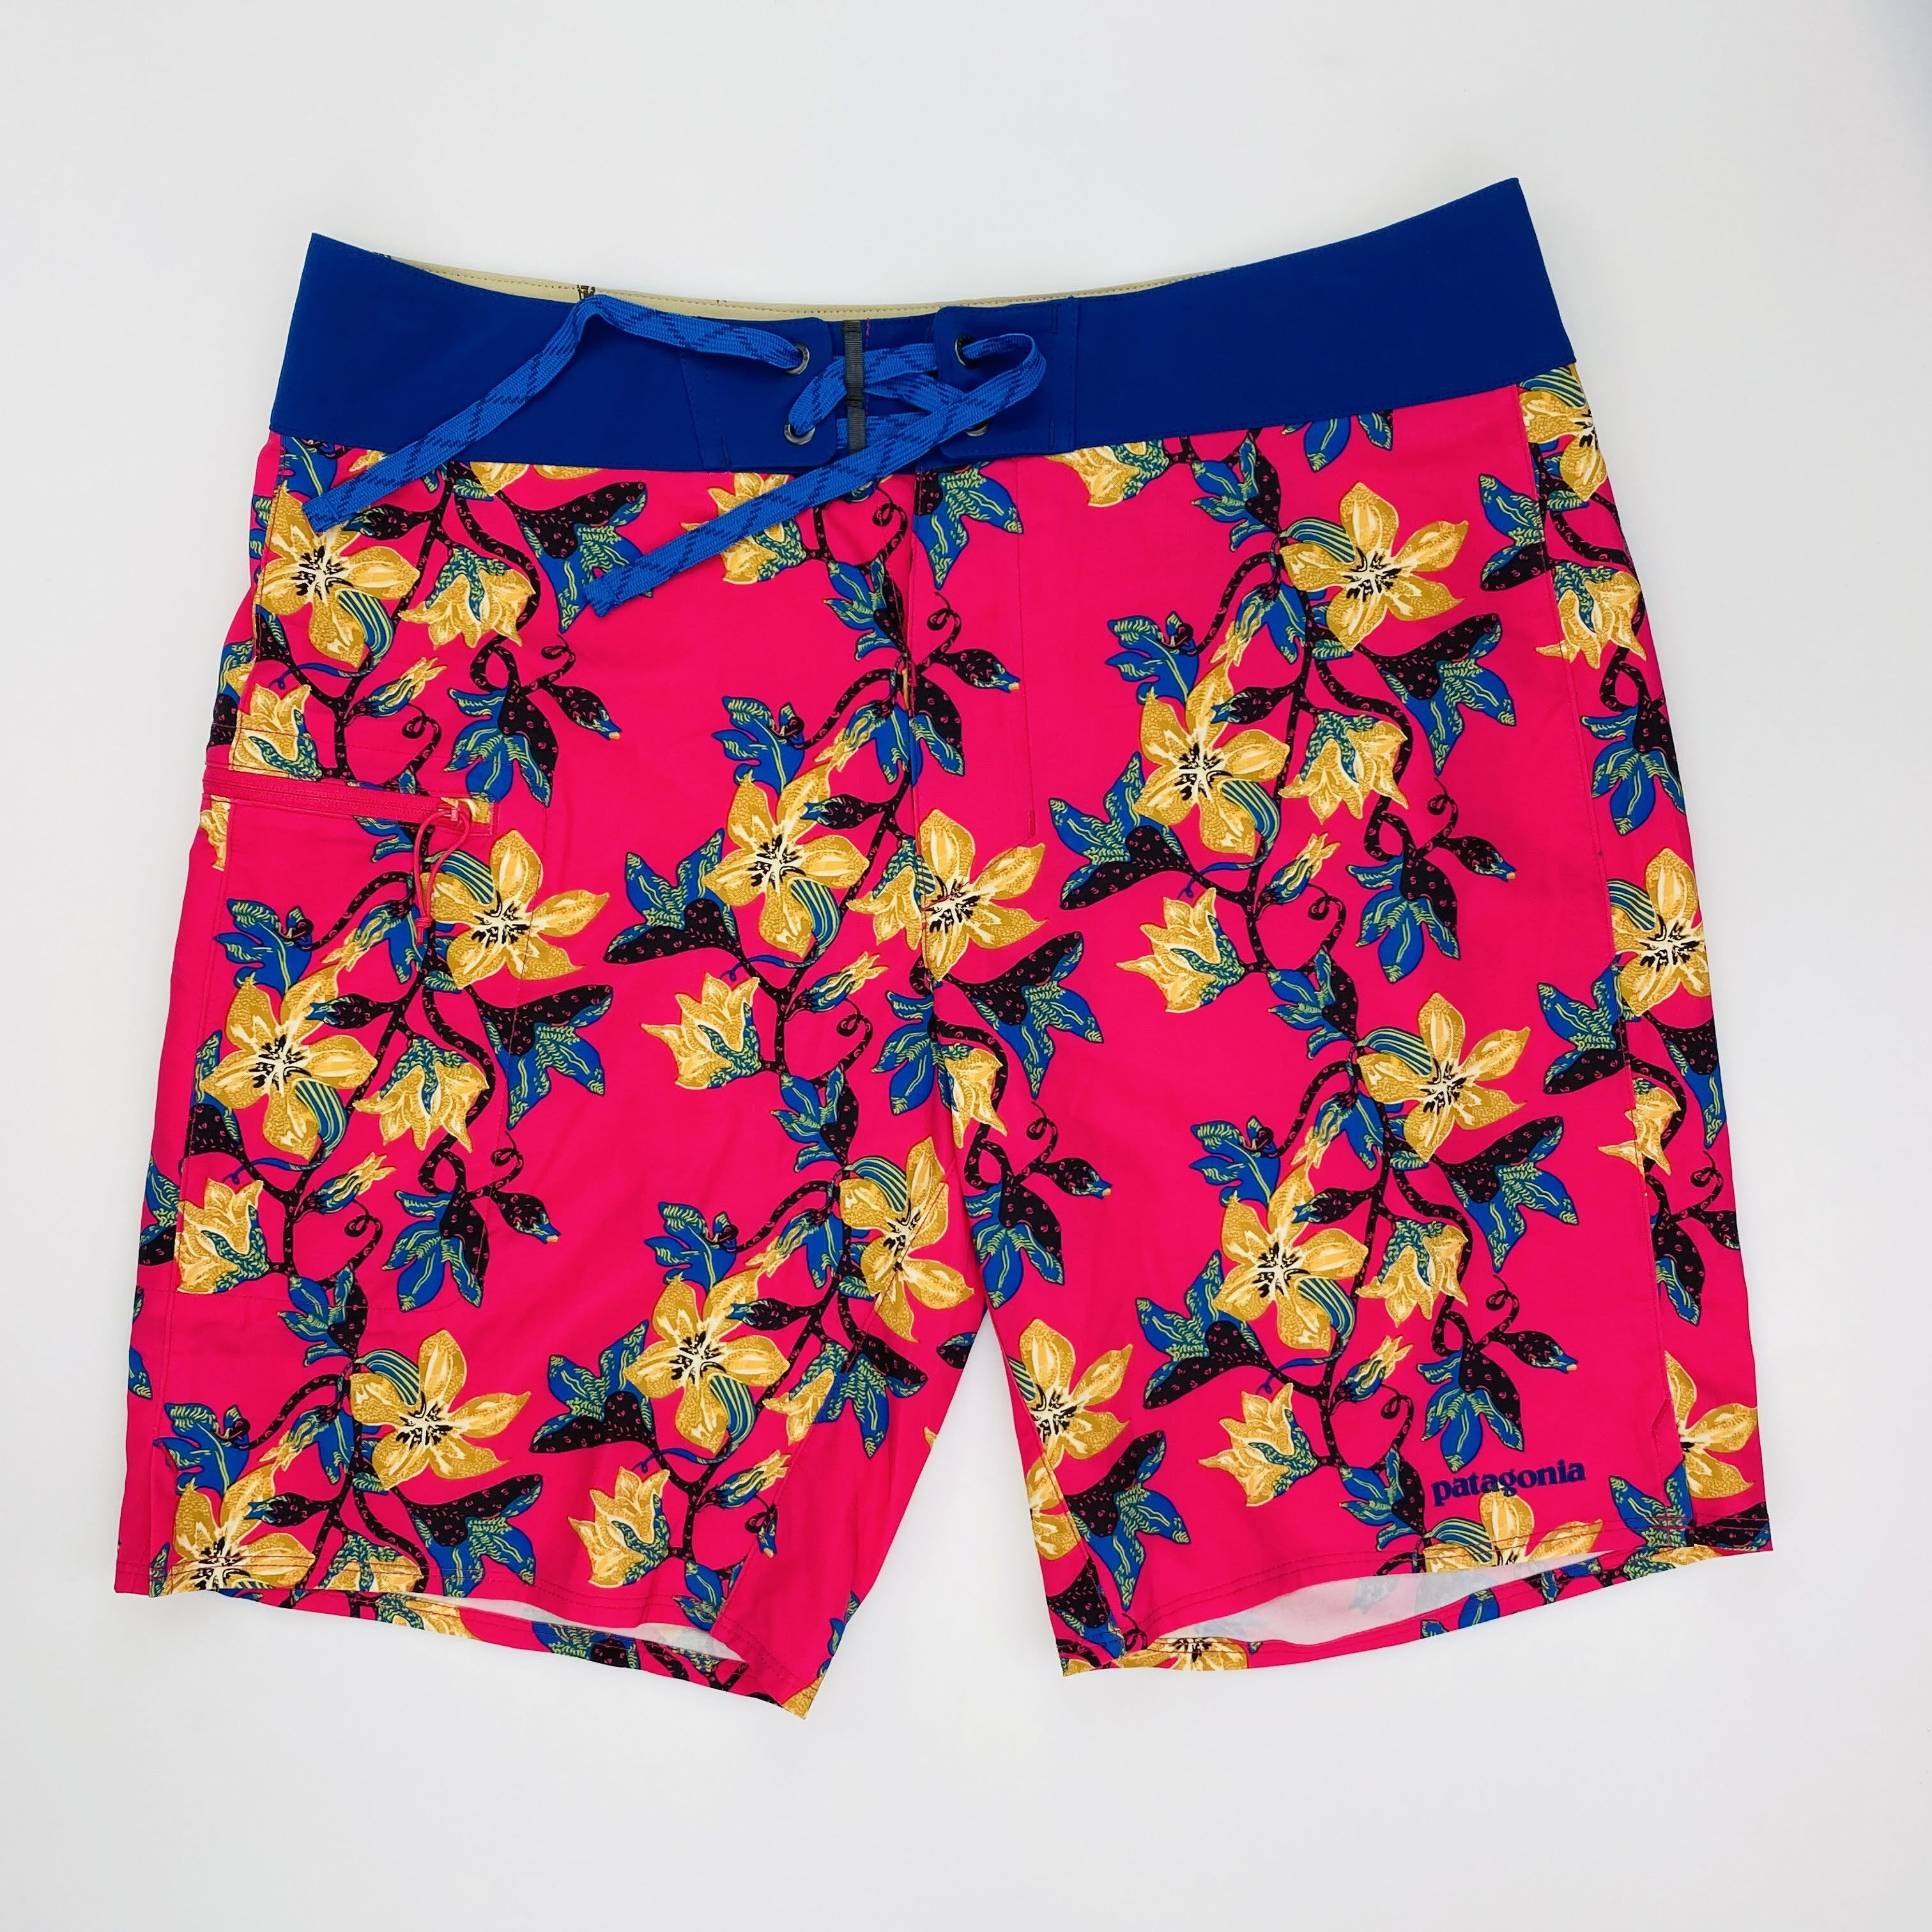 Patagonia M's Stretch Planing Boardshorts - 19 in. - Second Hand Shorts - Men's - Multicolored - 42 | Hardloop